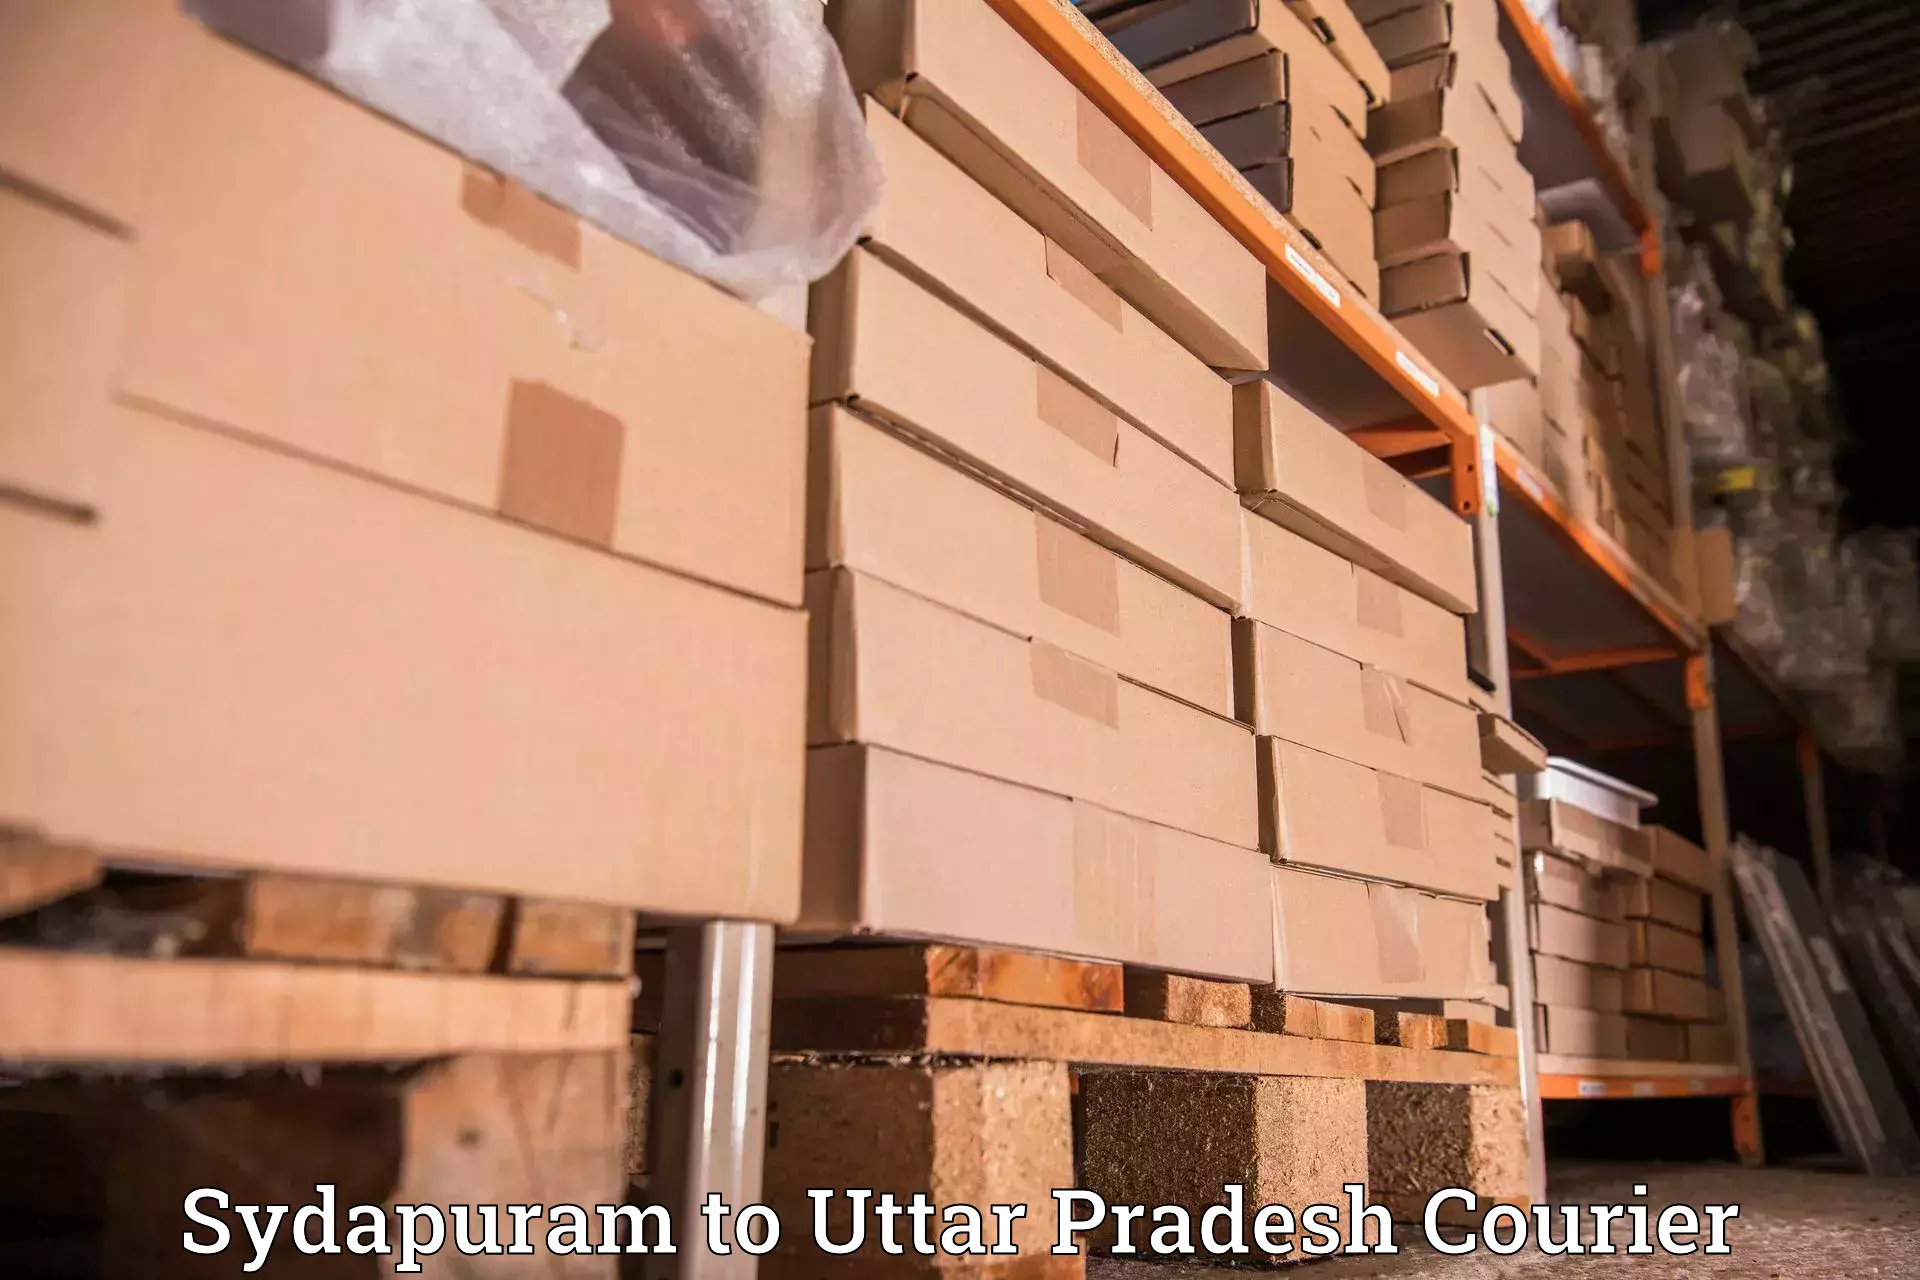 Multi-national courier services Sydapuram to Kanth